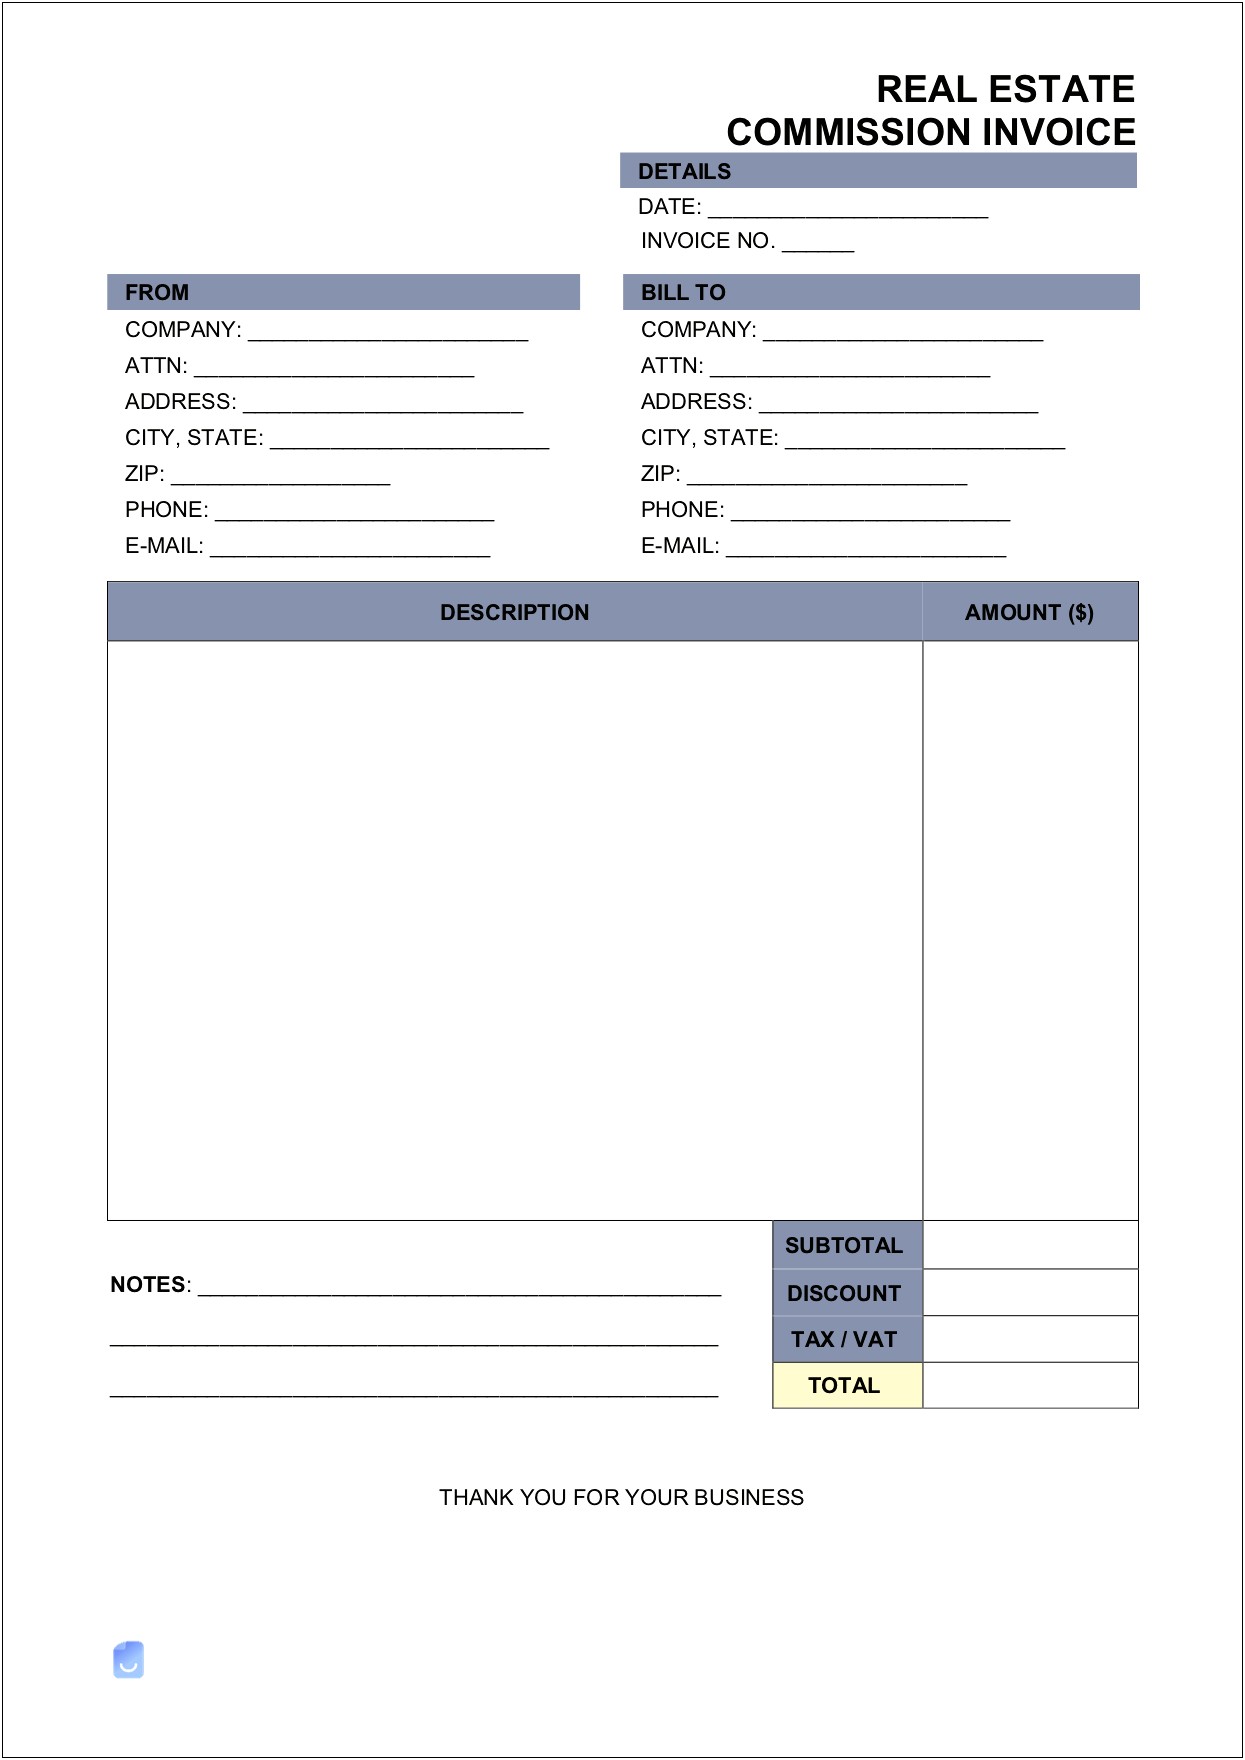 Real Estate Commission Tracker Spreadsheet Template Free